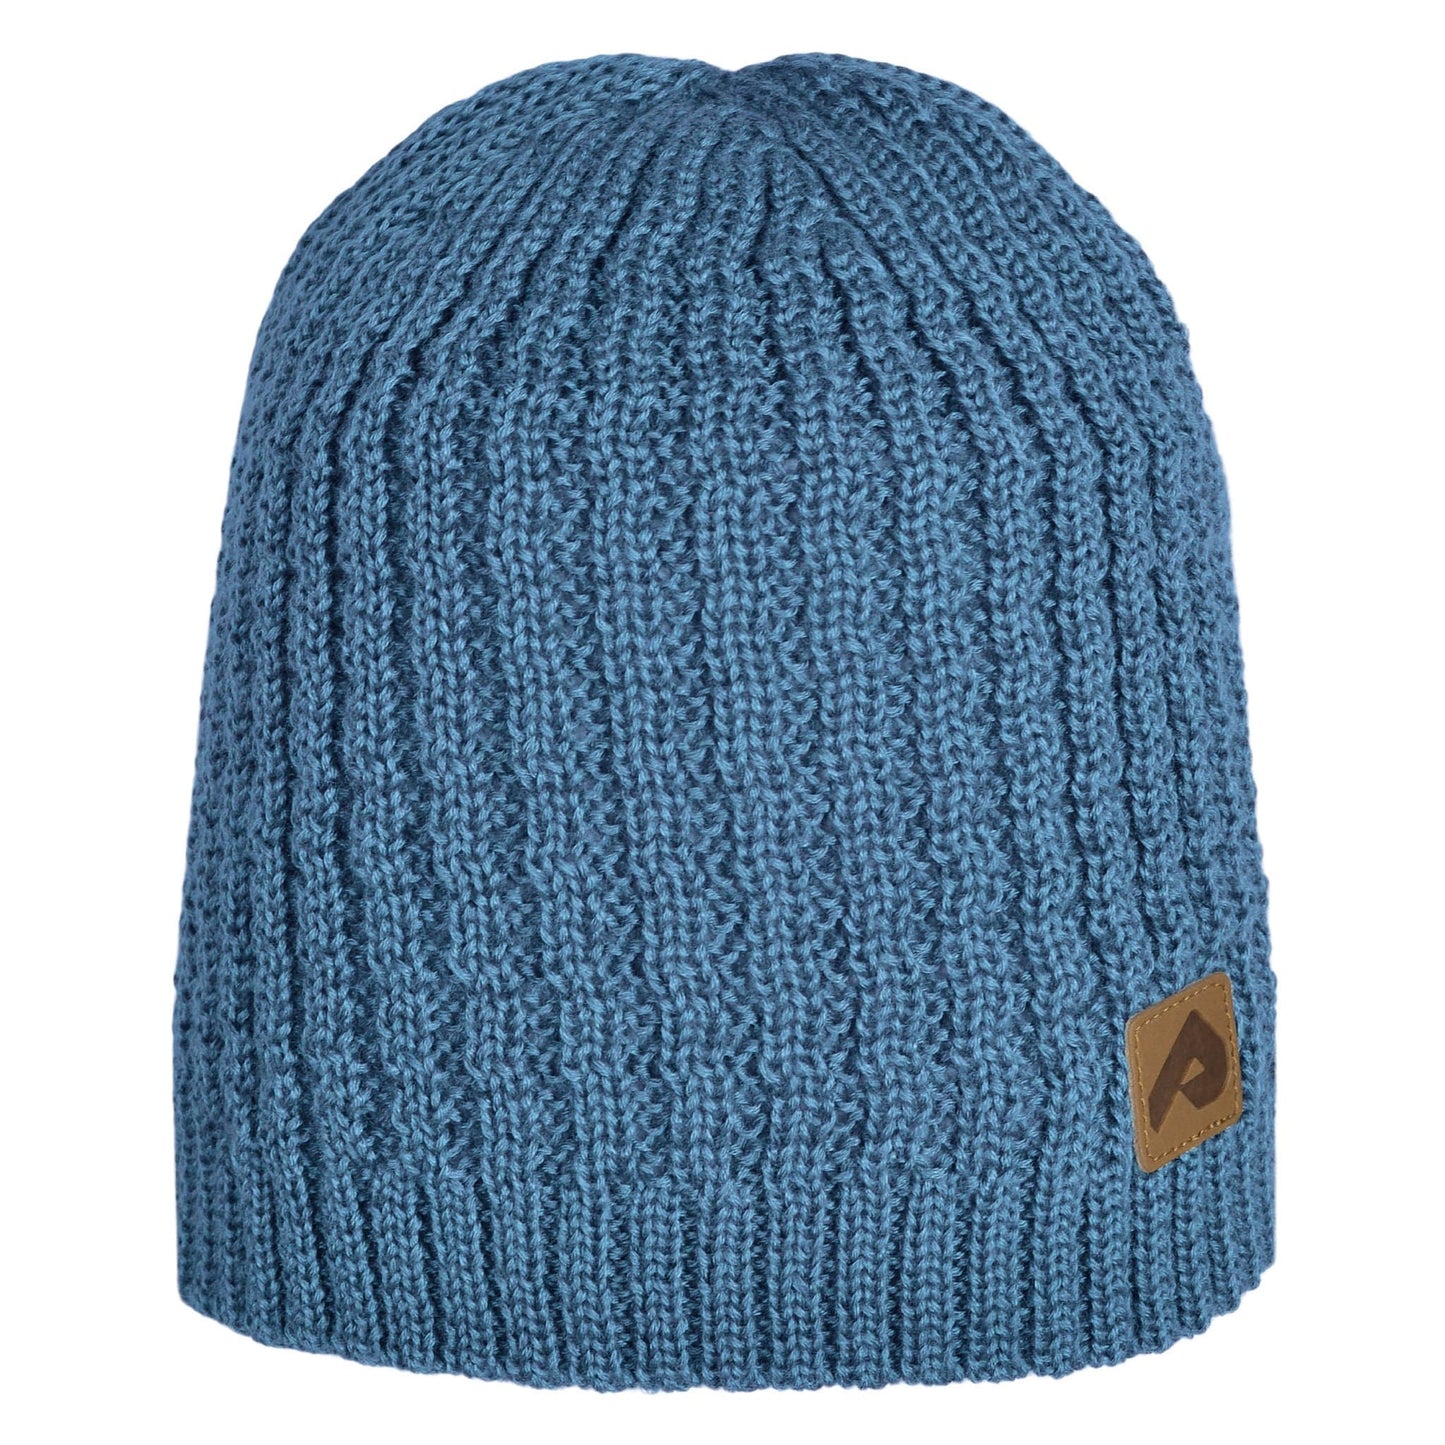 Knitted acrylic hat - Midnight blue